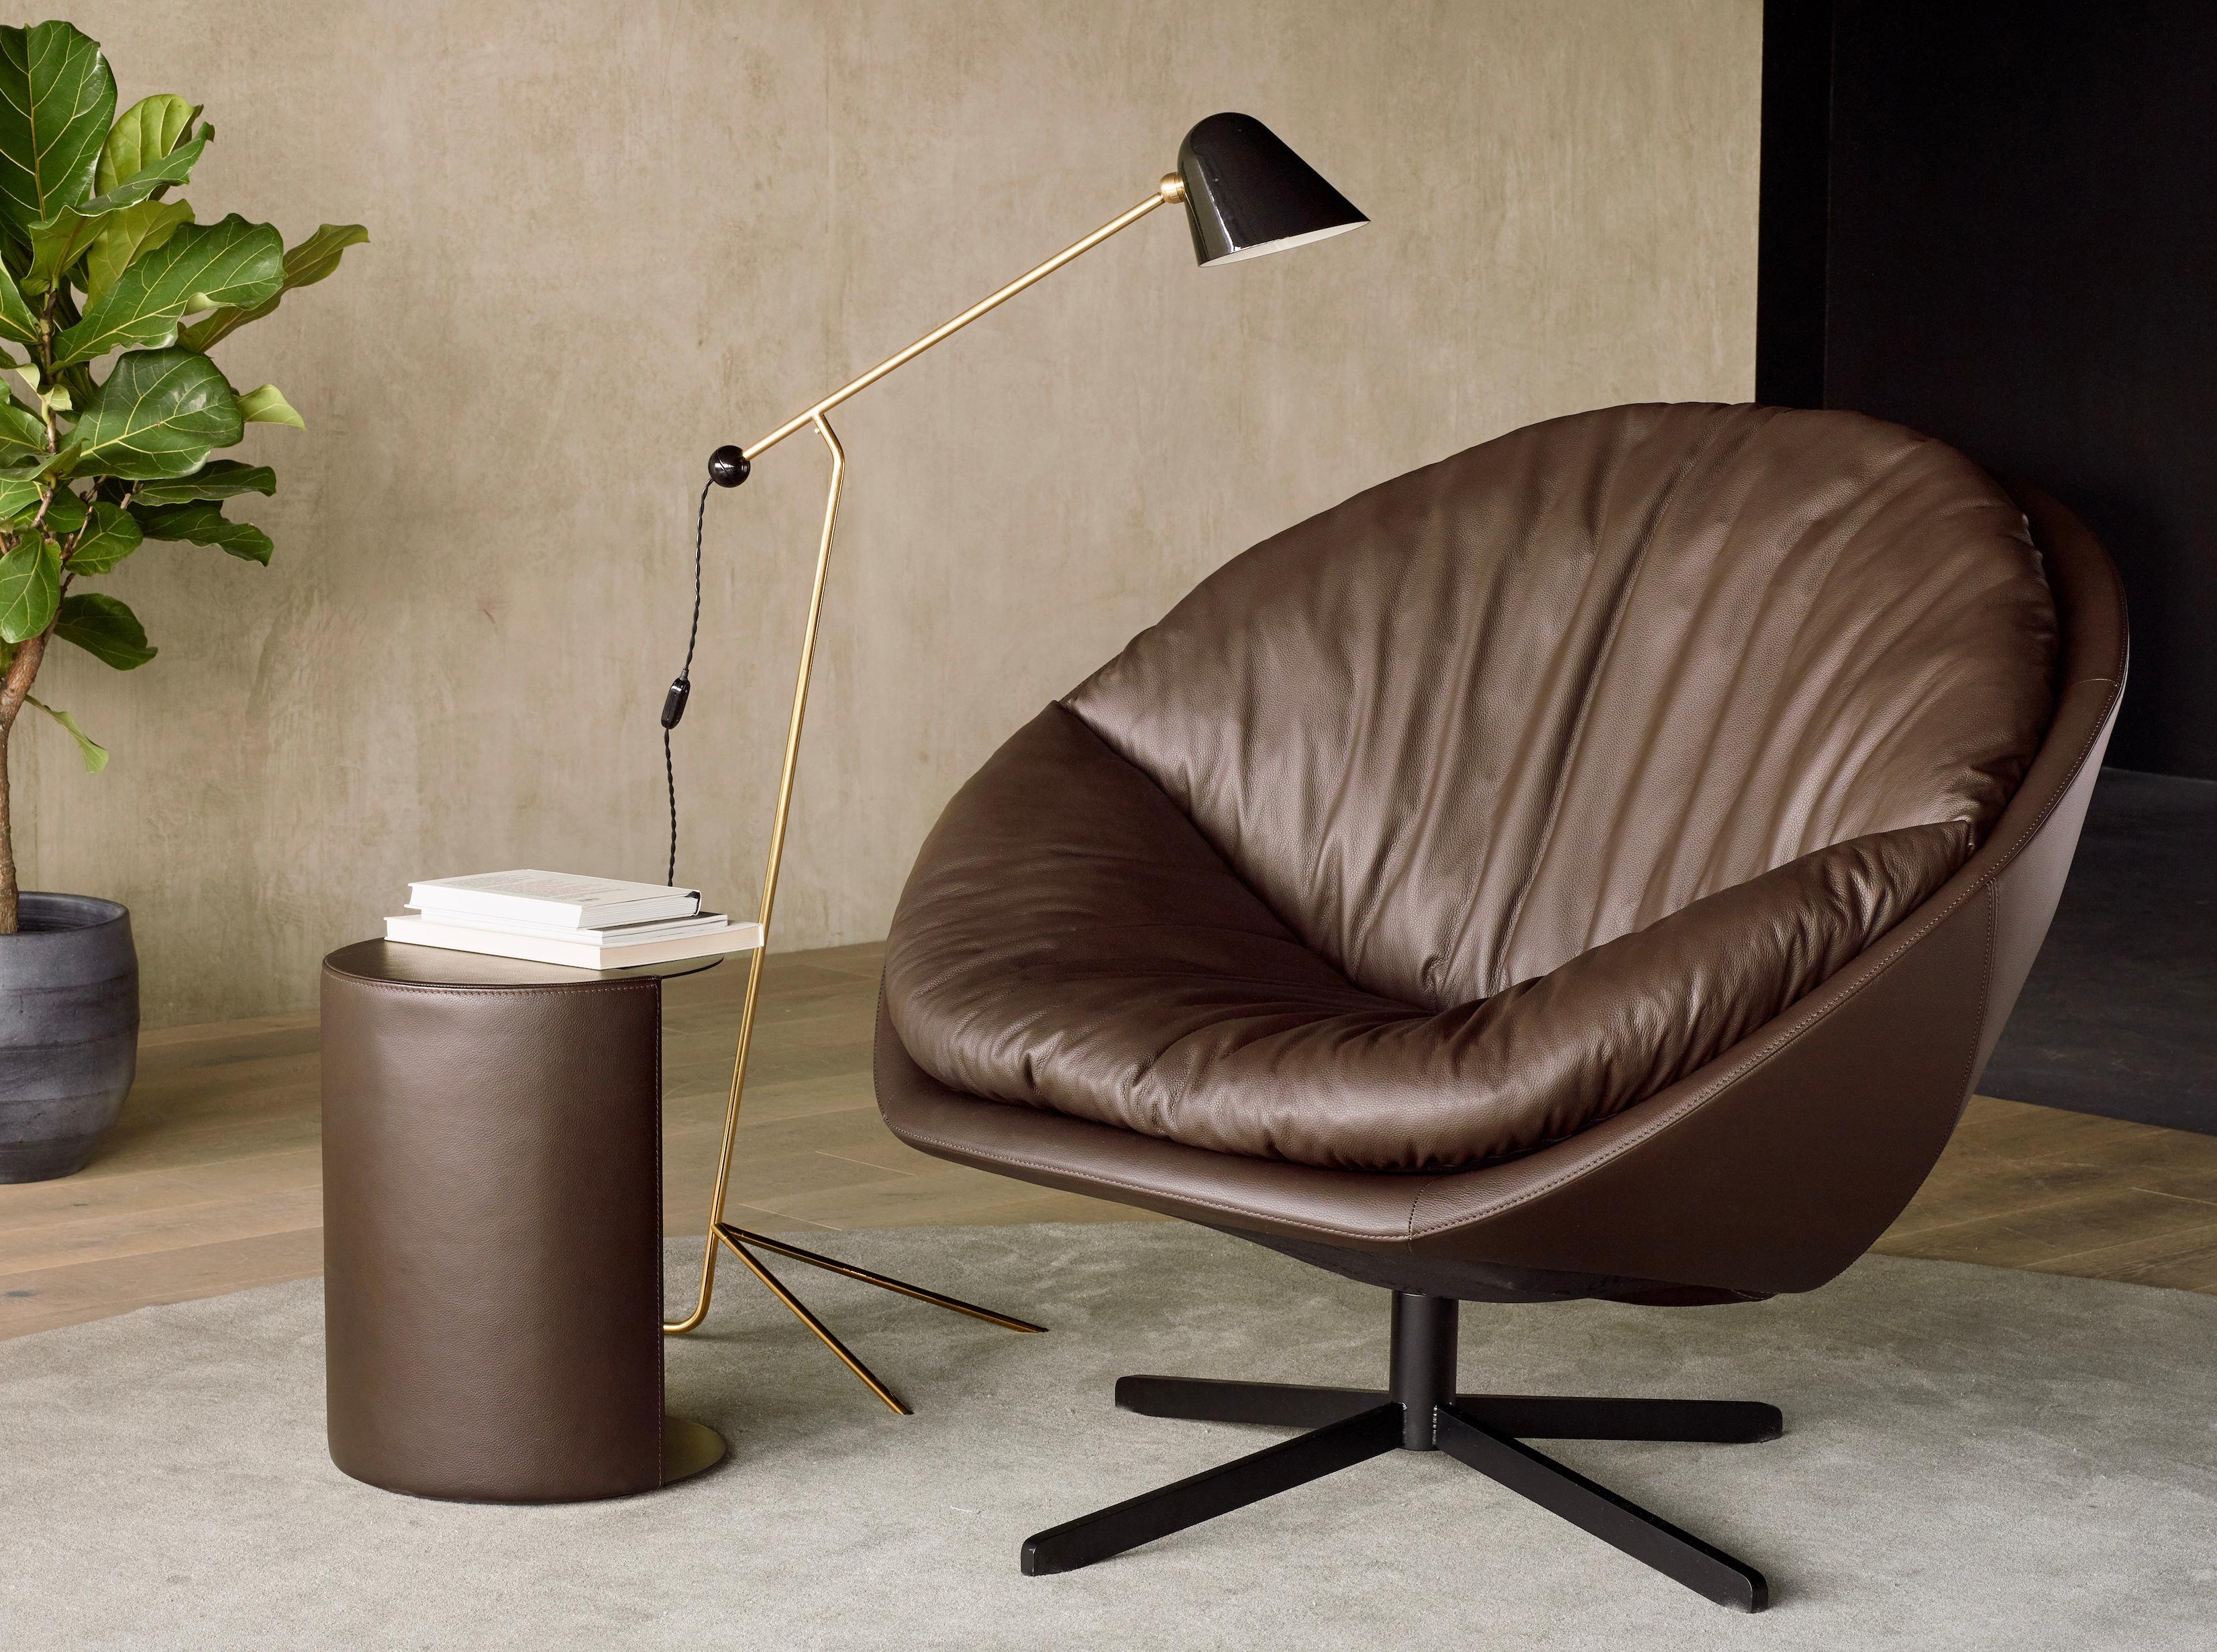 De Sede DS-265 Coco in Full leather 'Touch', color Cigarro. New, current production.

Price mentioned is for a chair with both the outer shell in high quality 'Touch' leather + the cushion in the same leather.

The DS-265 Coco is an oasis of